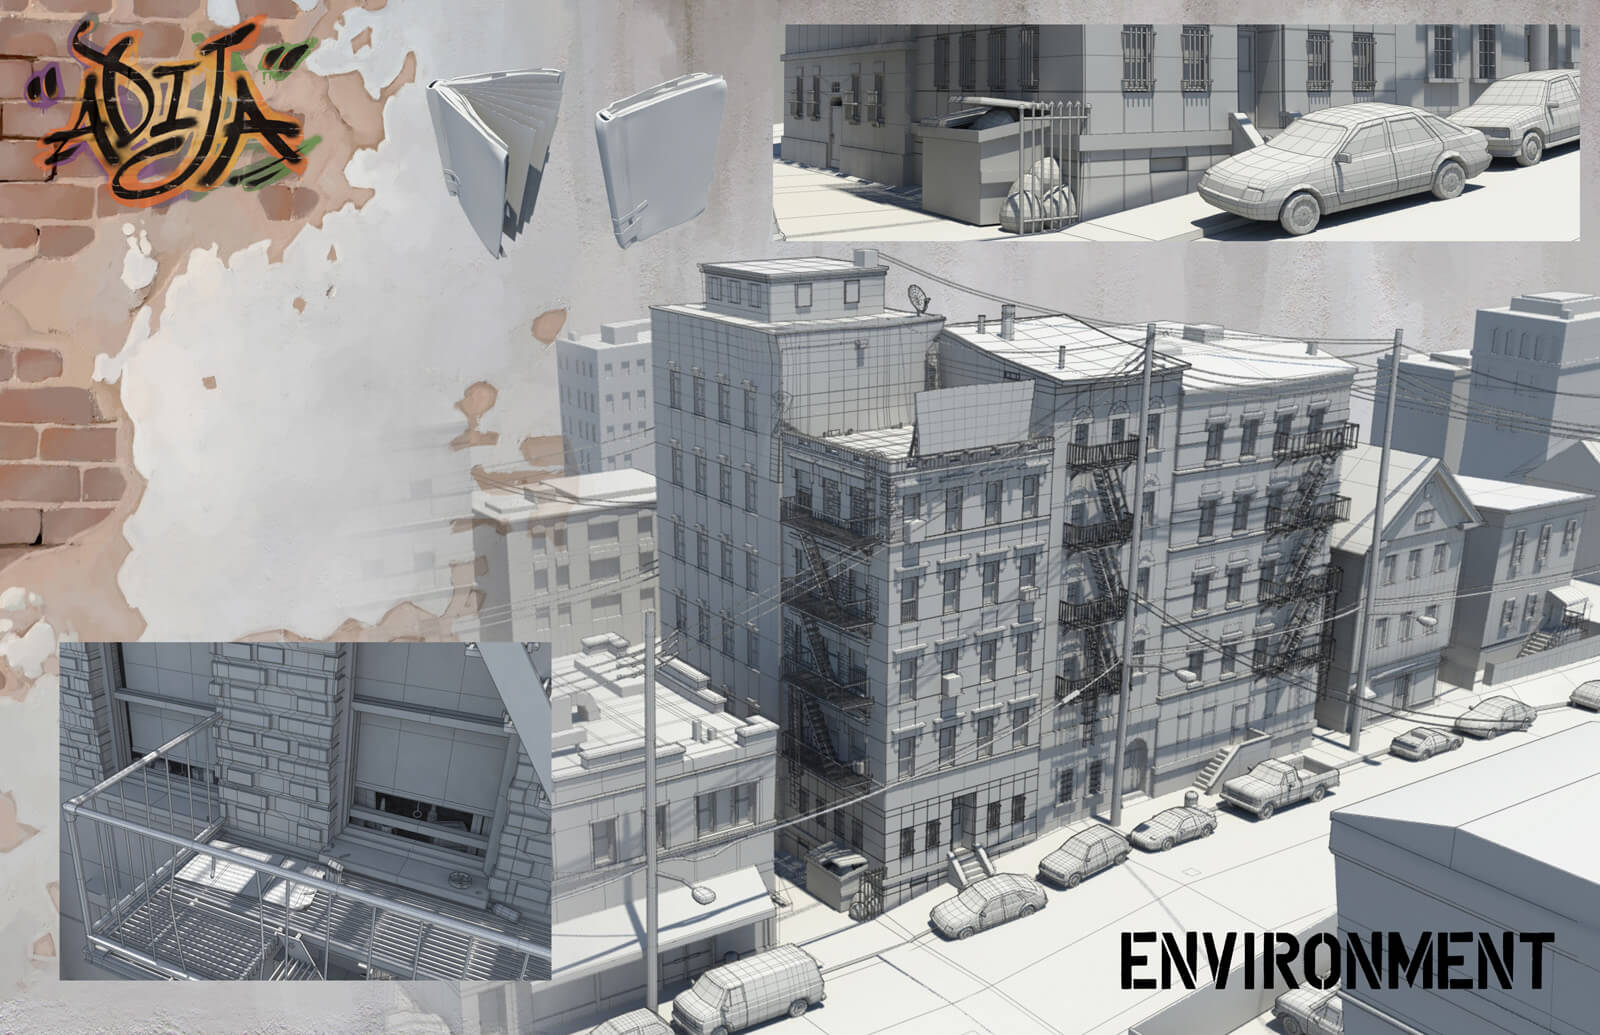 Environmental design sheet showing 3D wireframe models of the apartment exteriors in the film Adija